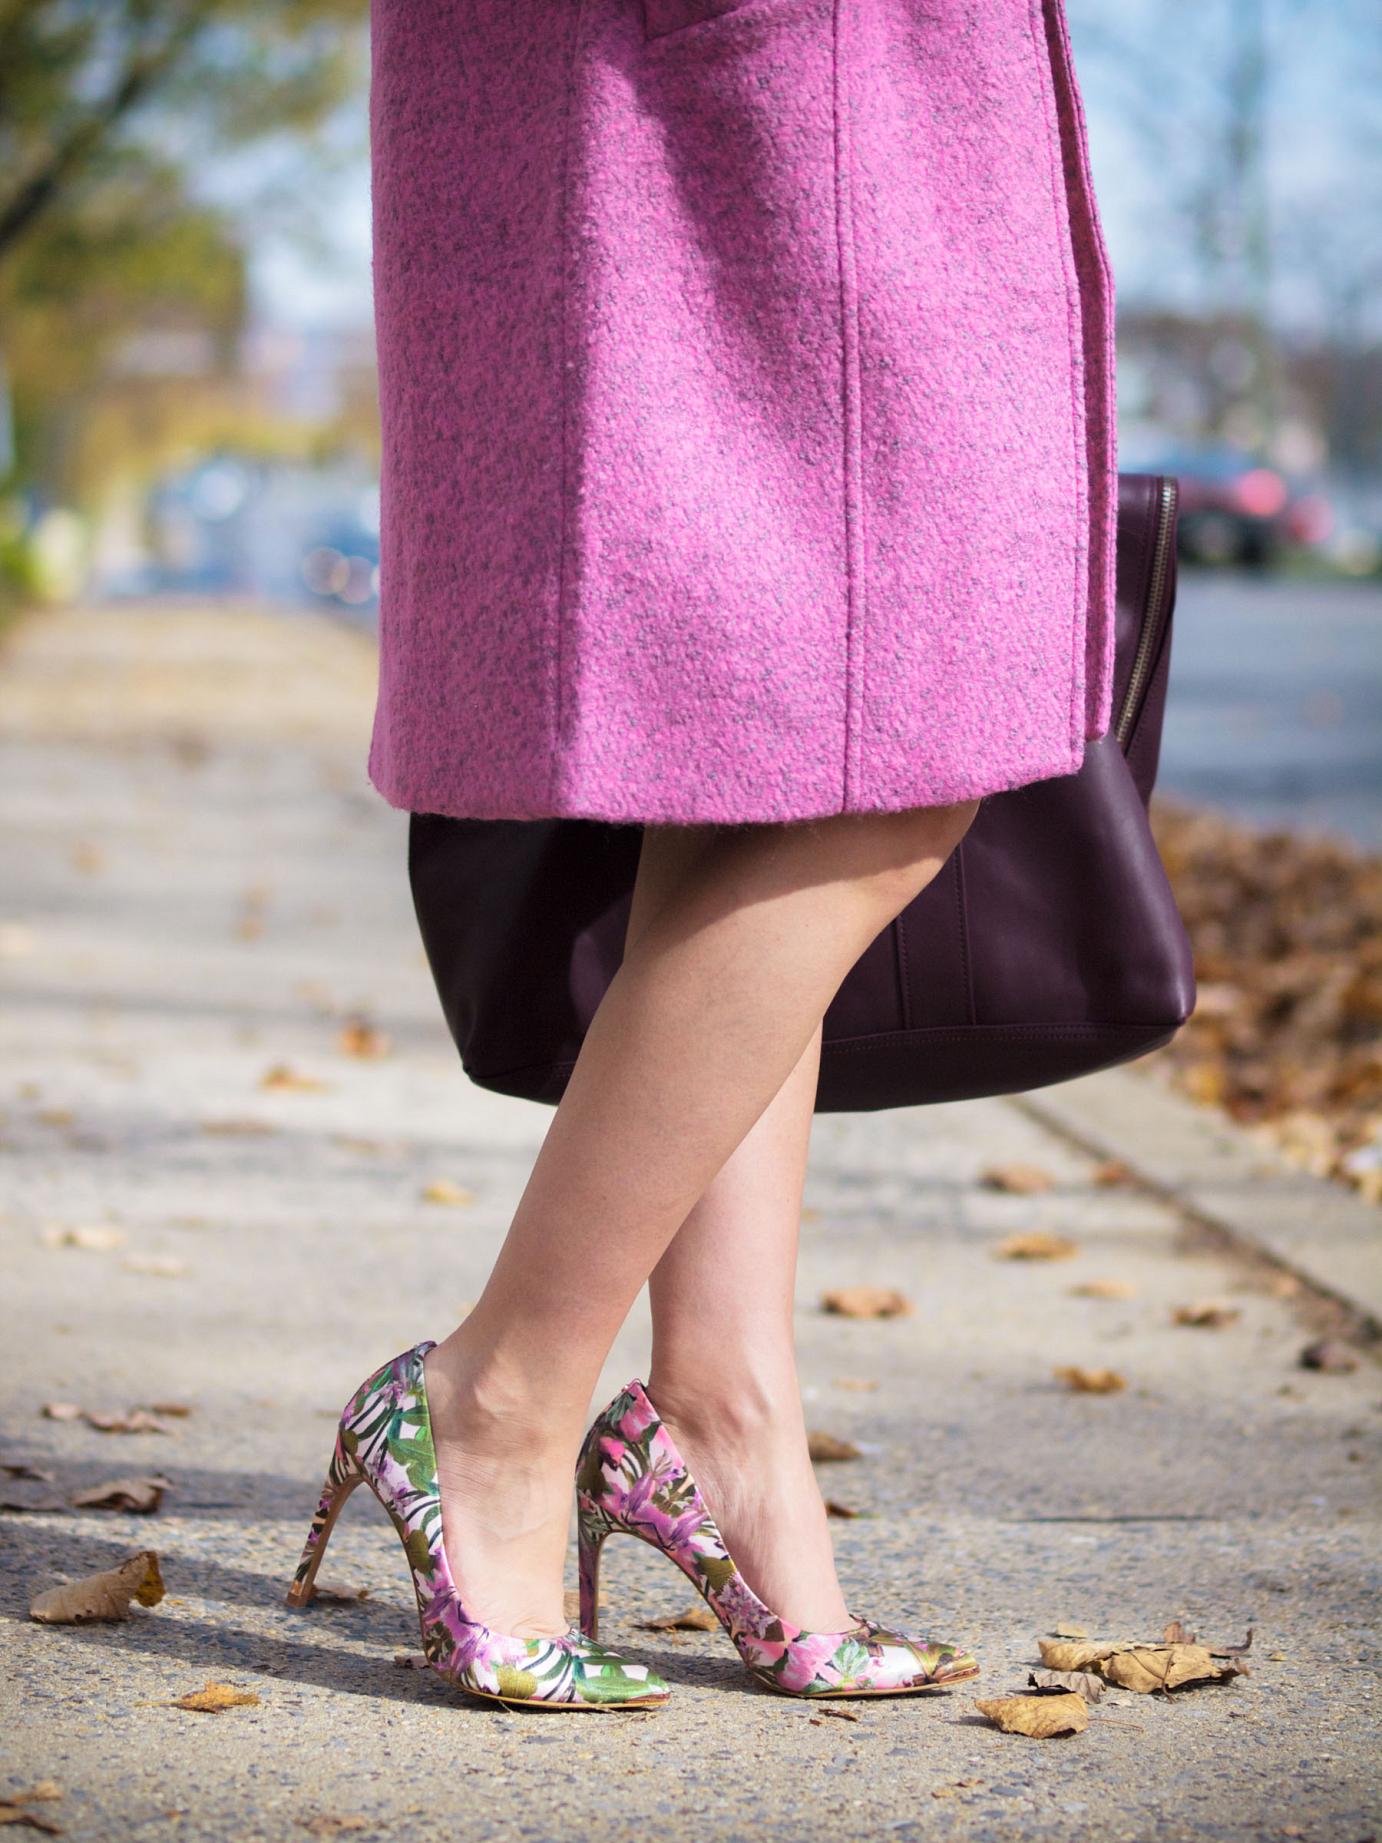 bittersweet colours, maternity style, bumb style, 21 weeks, fall street style, street style, fall trends, pink coat, gestuz coat, 3.1 phillip lim bag, ted baker, floral print pumps, cashmere dress, camel dress, sweater dress, camel scarf, cashmere scarf, pink trend,